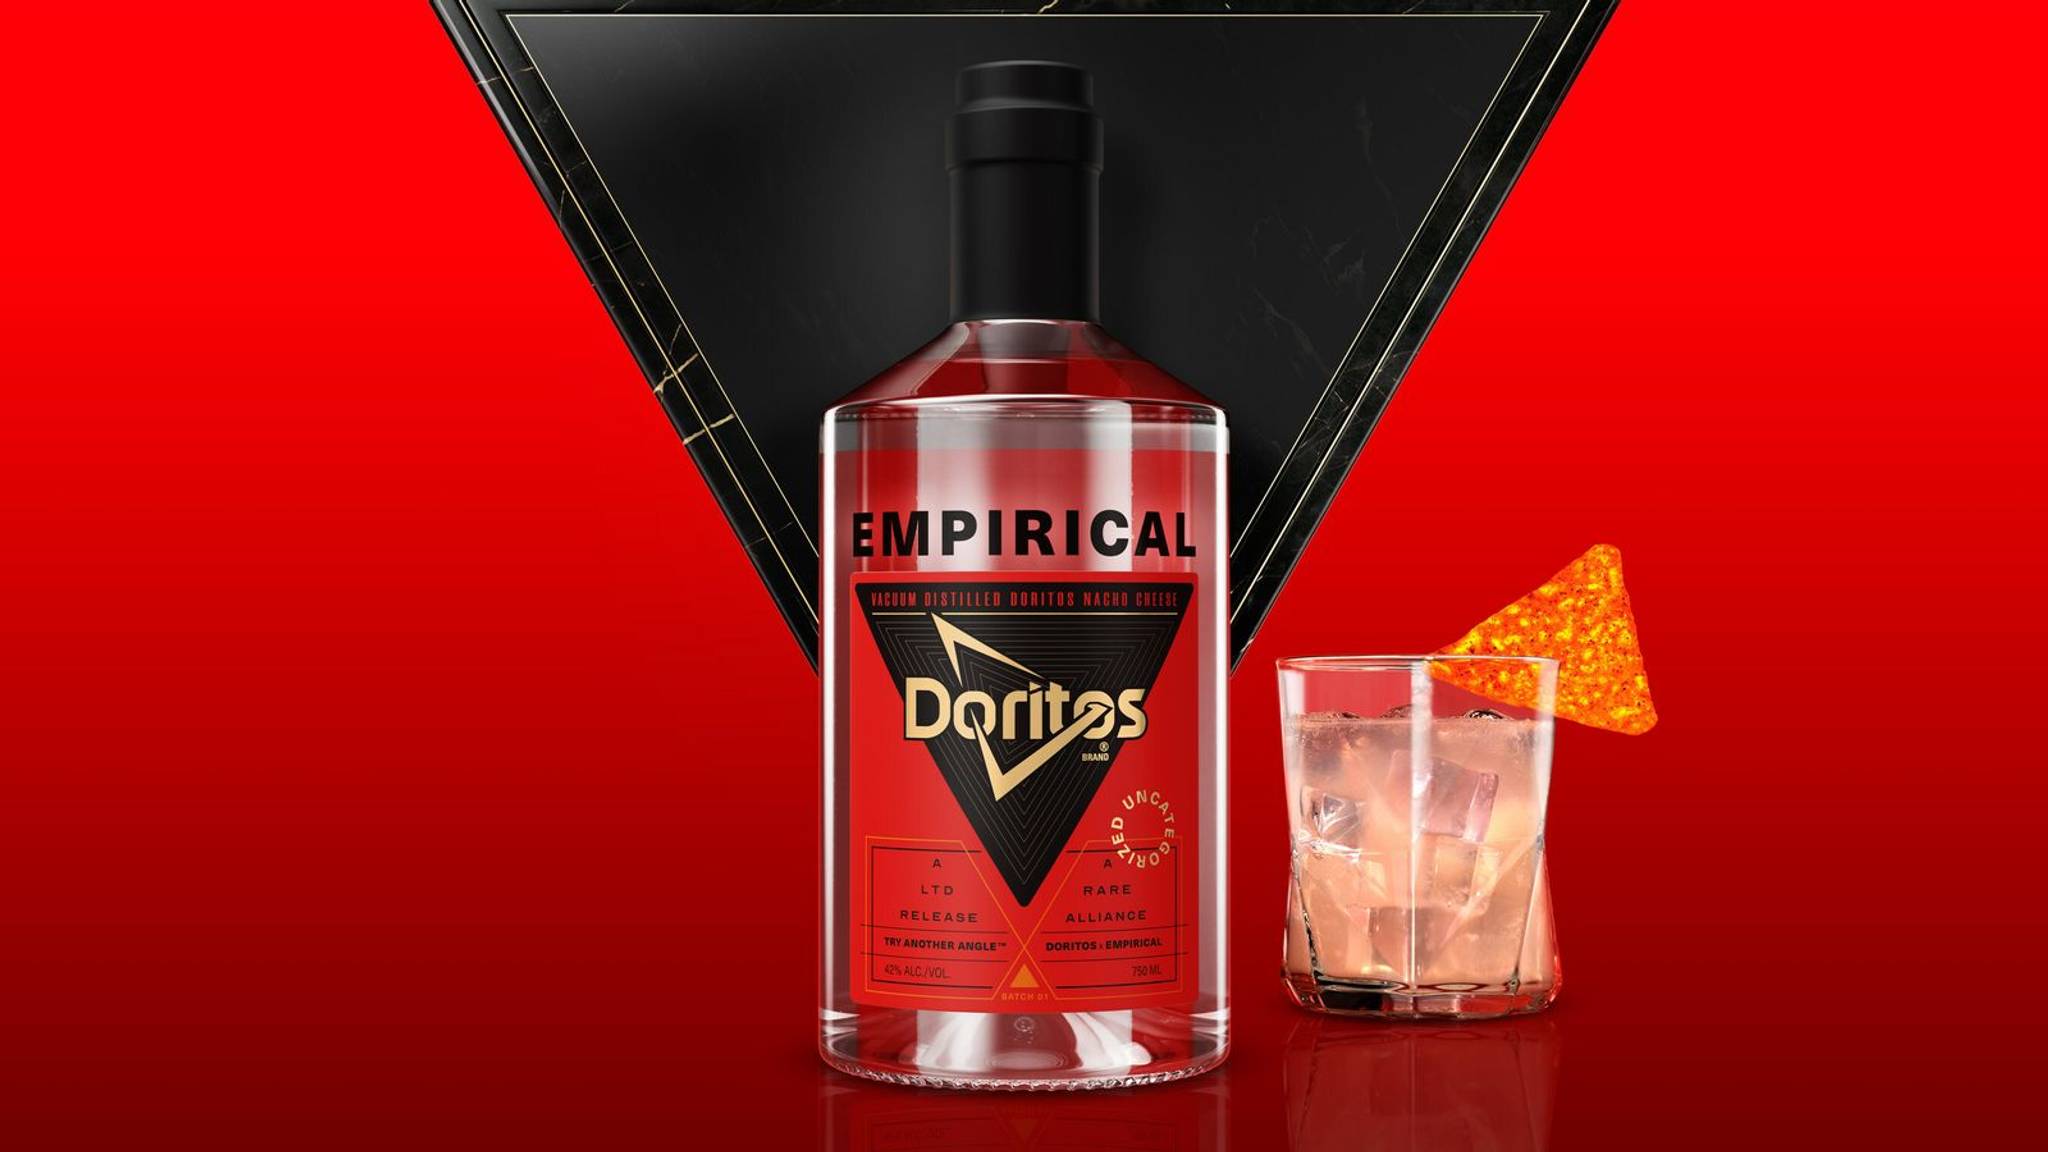 Doritos offers nacho cheese spirit for novelty-seekers